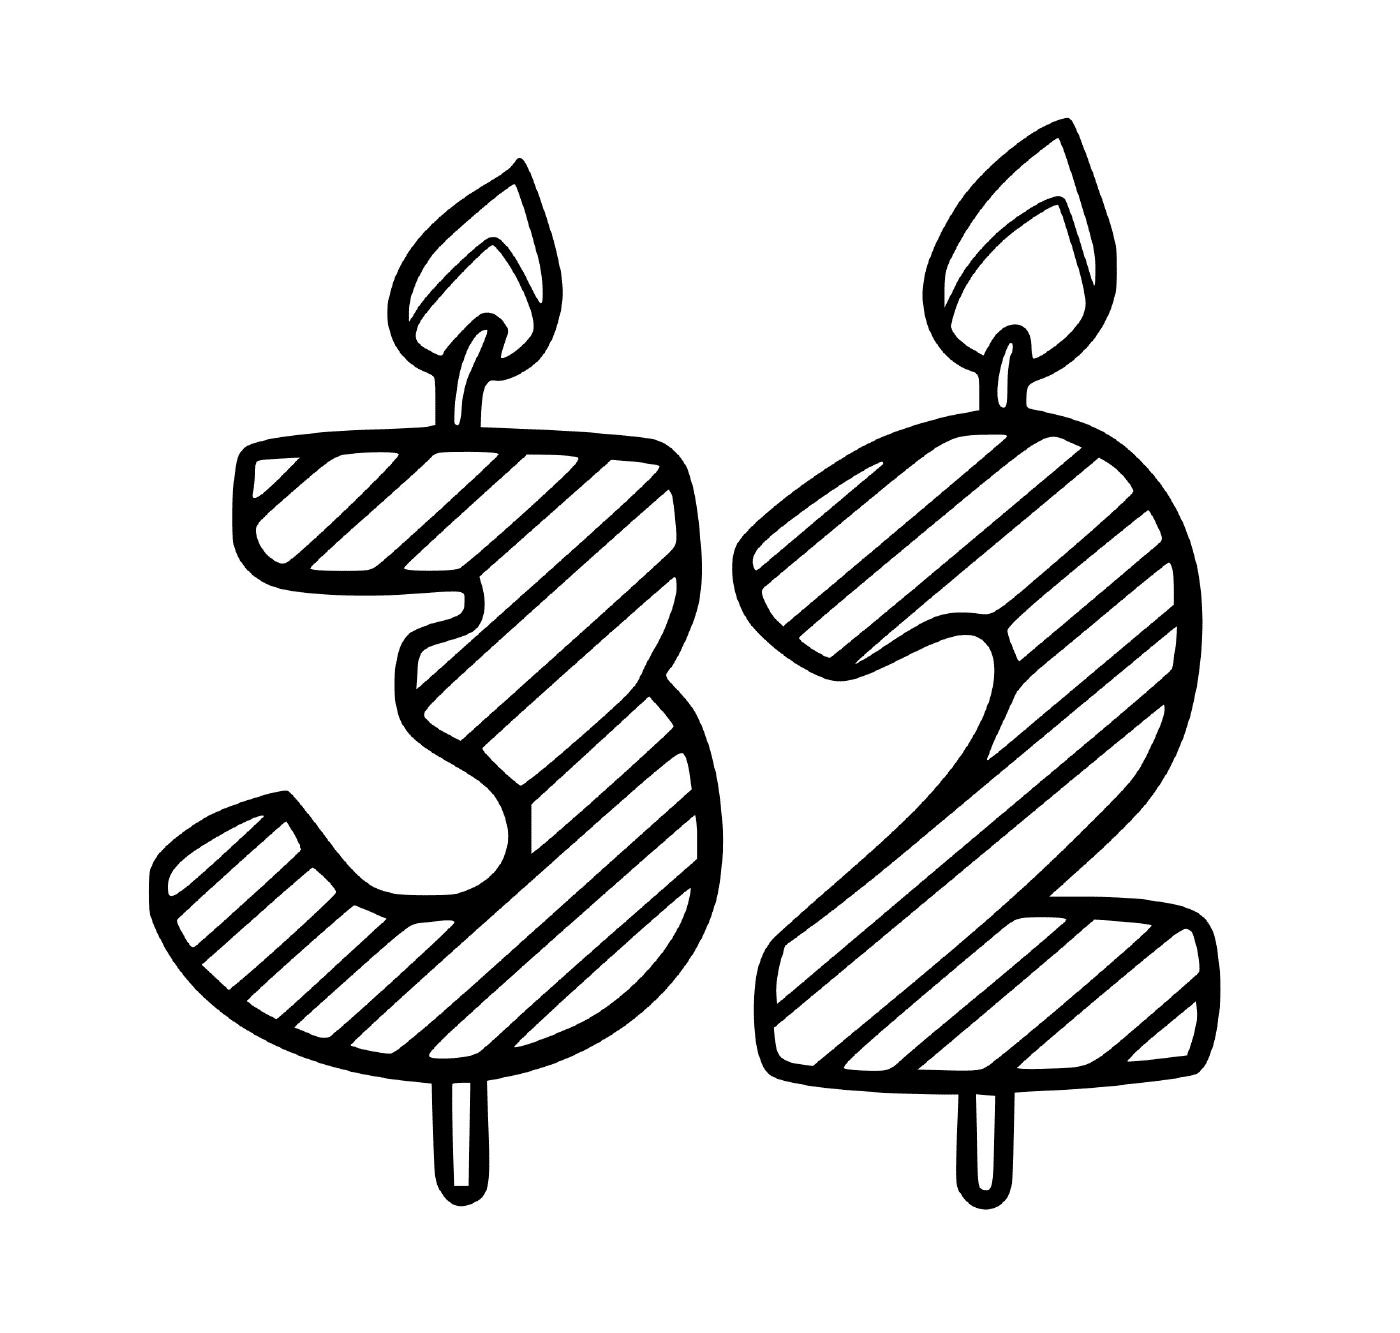  A candle in the shape of the number 3 2 